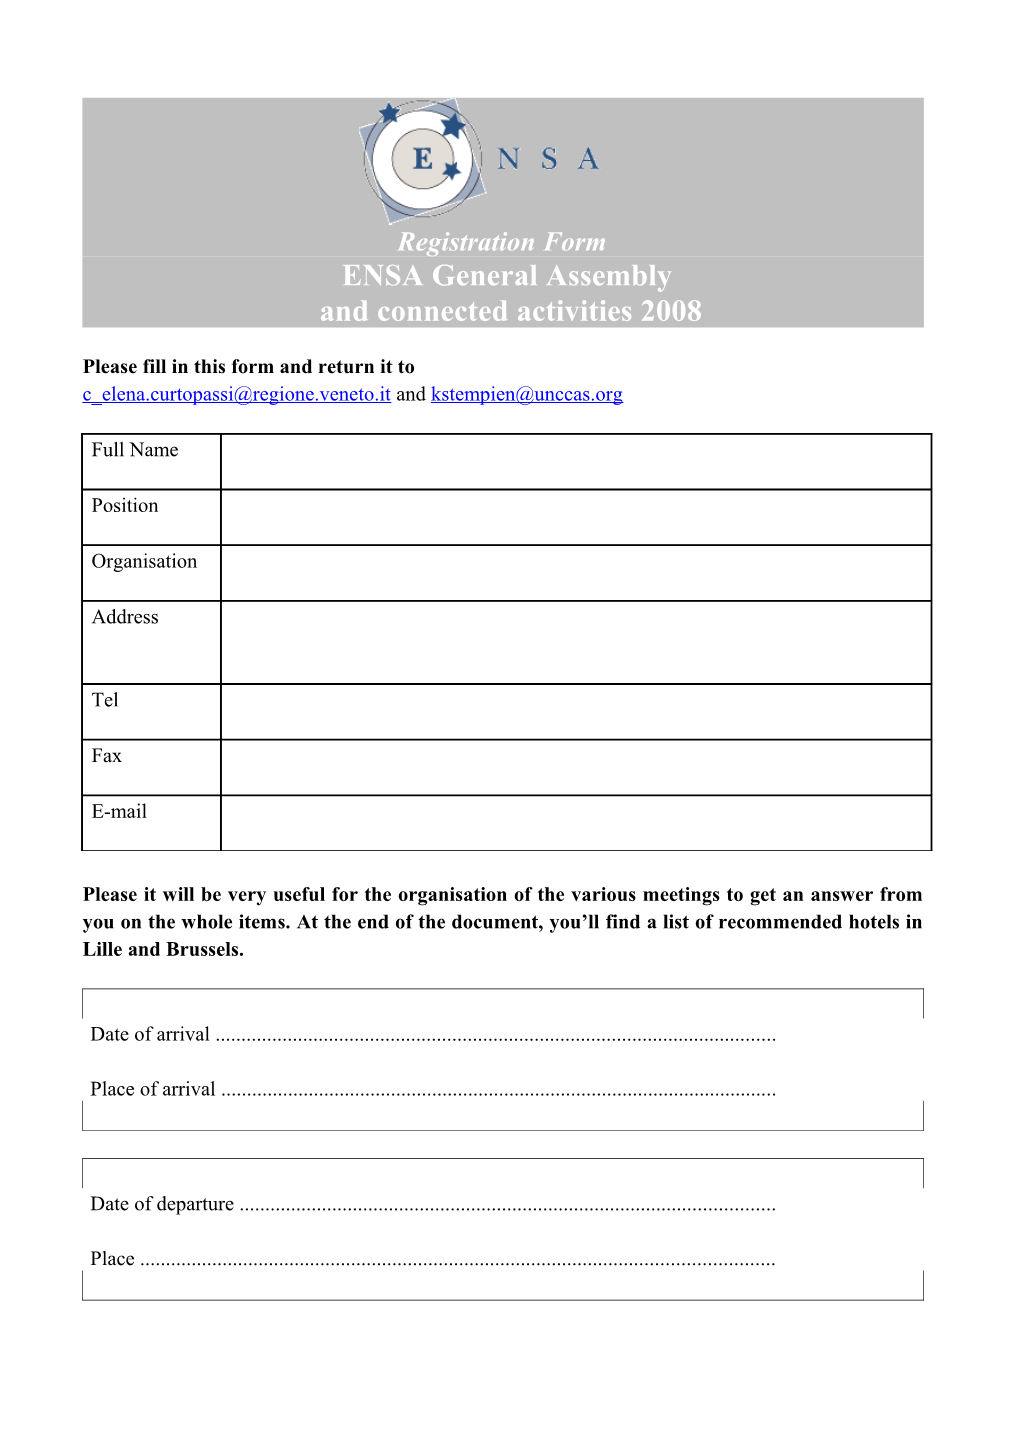 Please Fill in This Form and Return It To